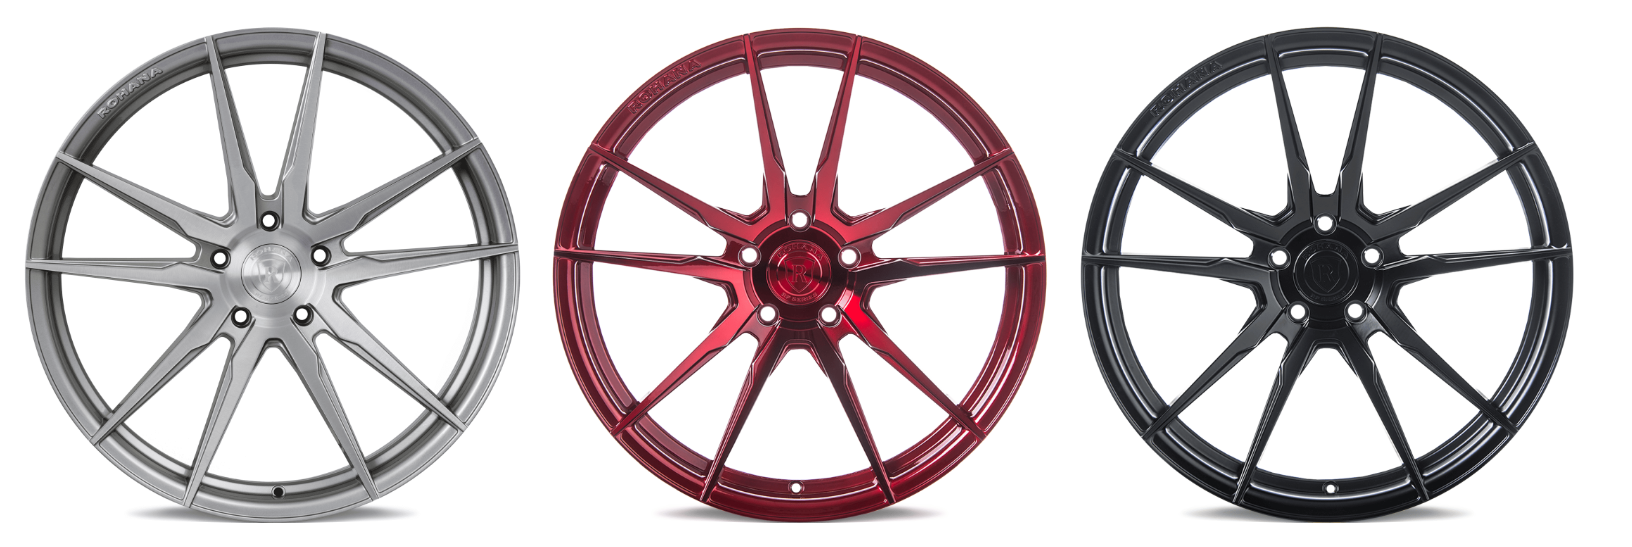 S650 Mustang Rohana Wheels RFX Series - Cross Forged & Max Concave Design - Vibe Motorsports 4.PNG